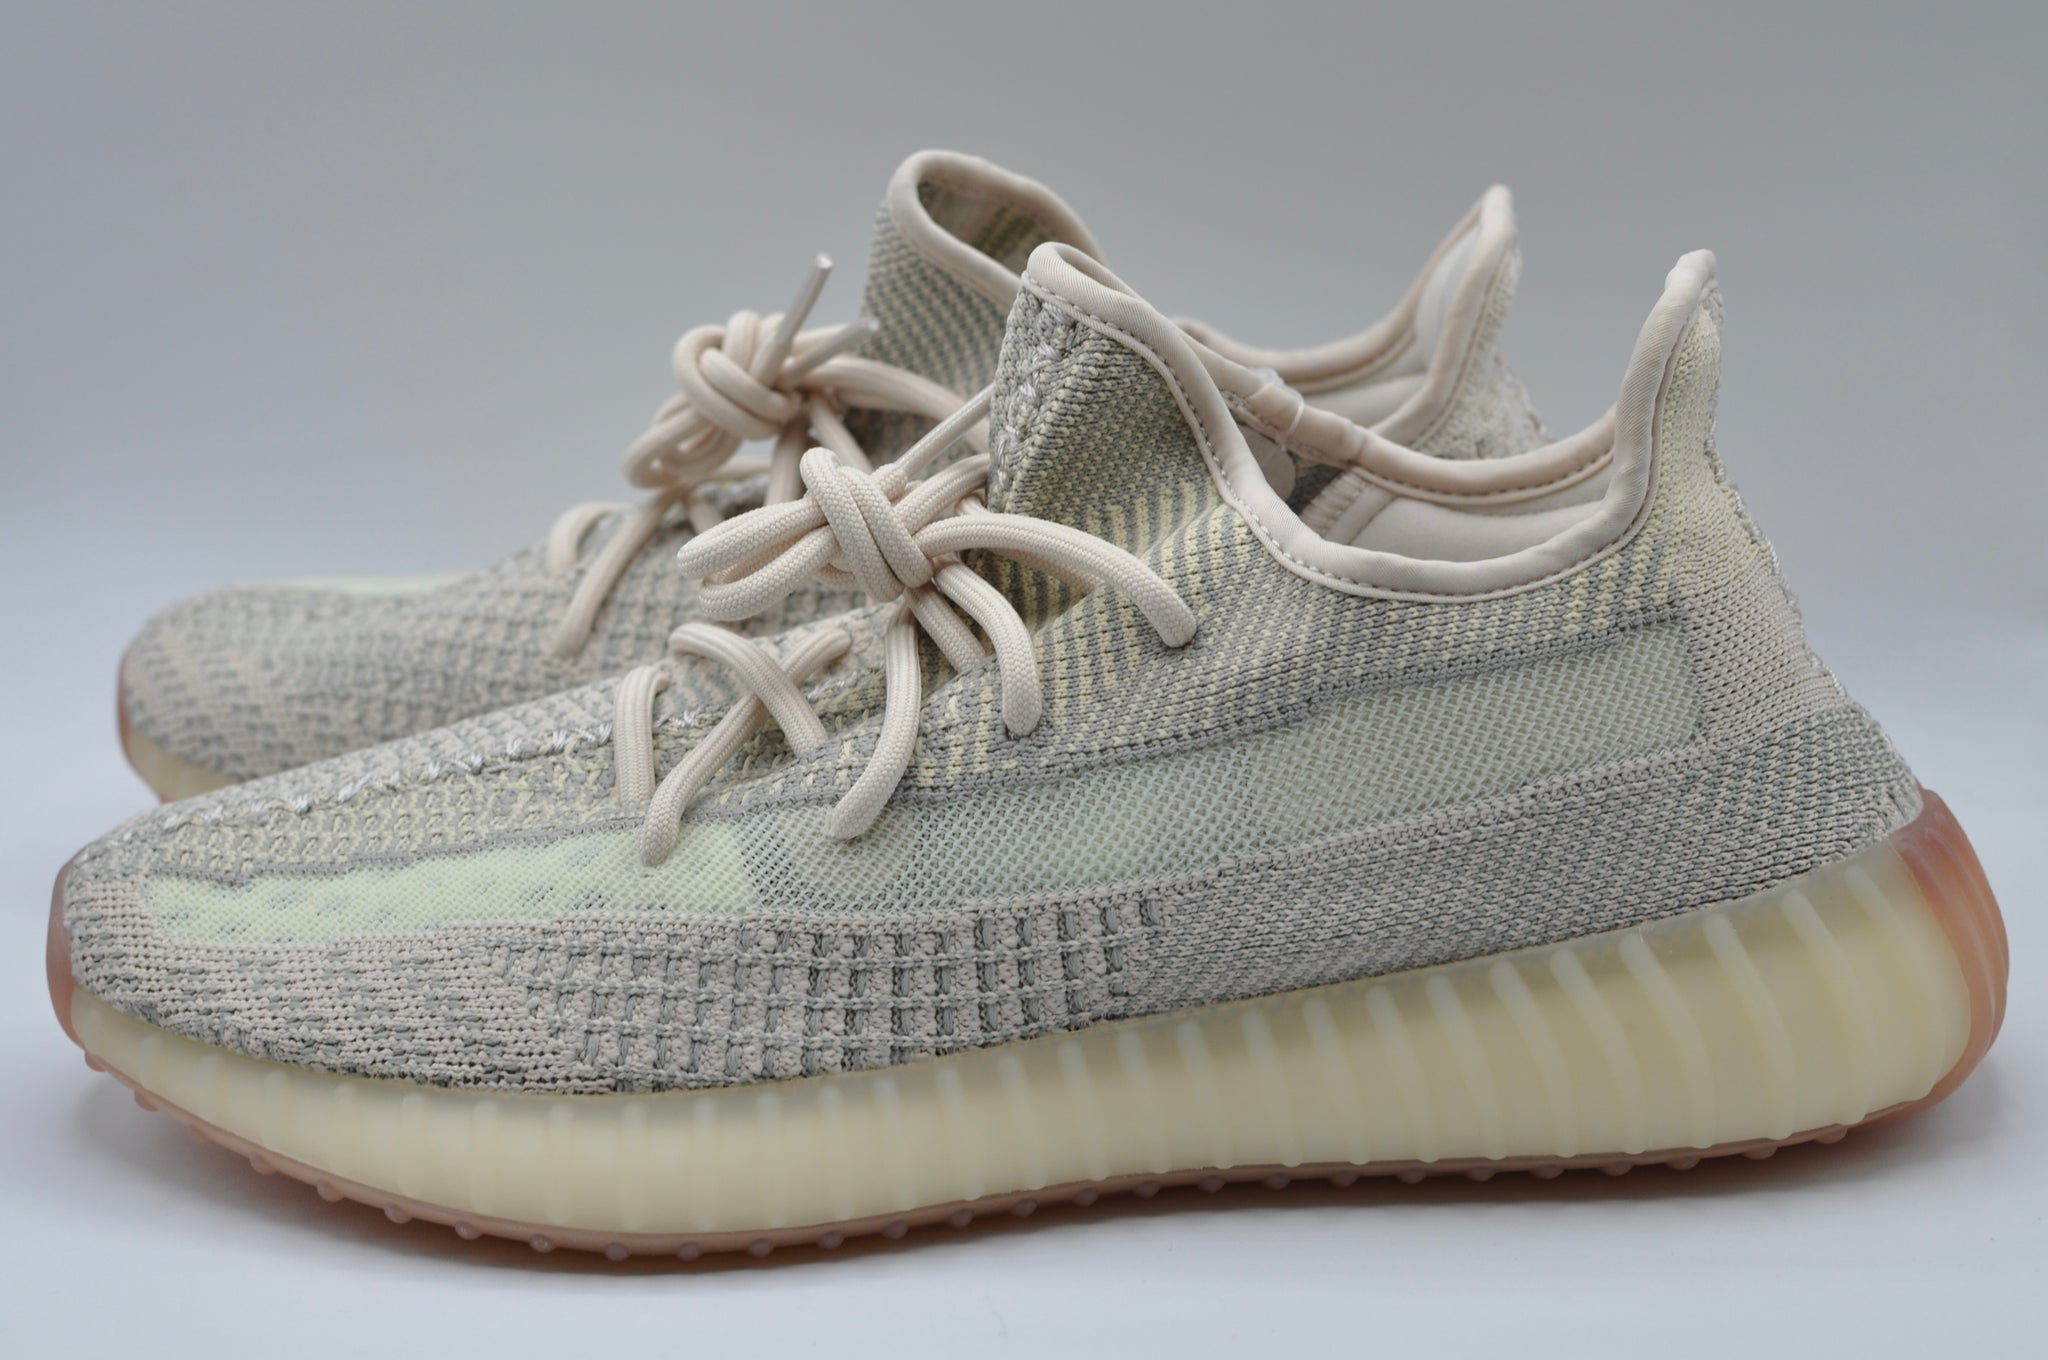 Adidas Yeezy Boost 350 V2 Citrin (non-reflective) – 21 Sneakers LLC